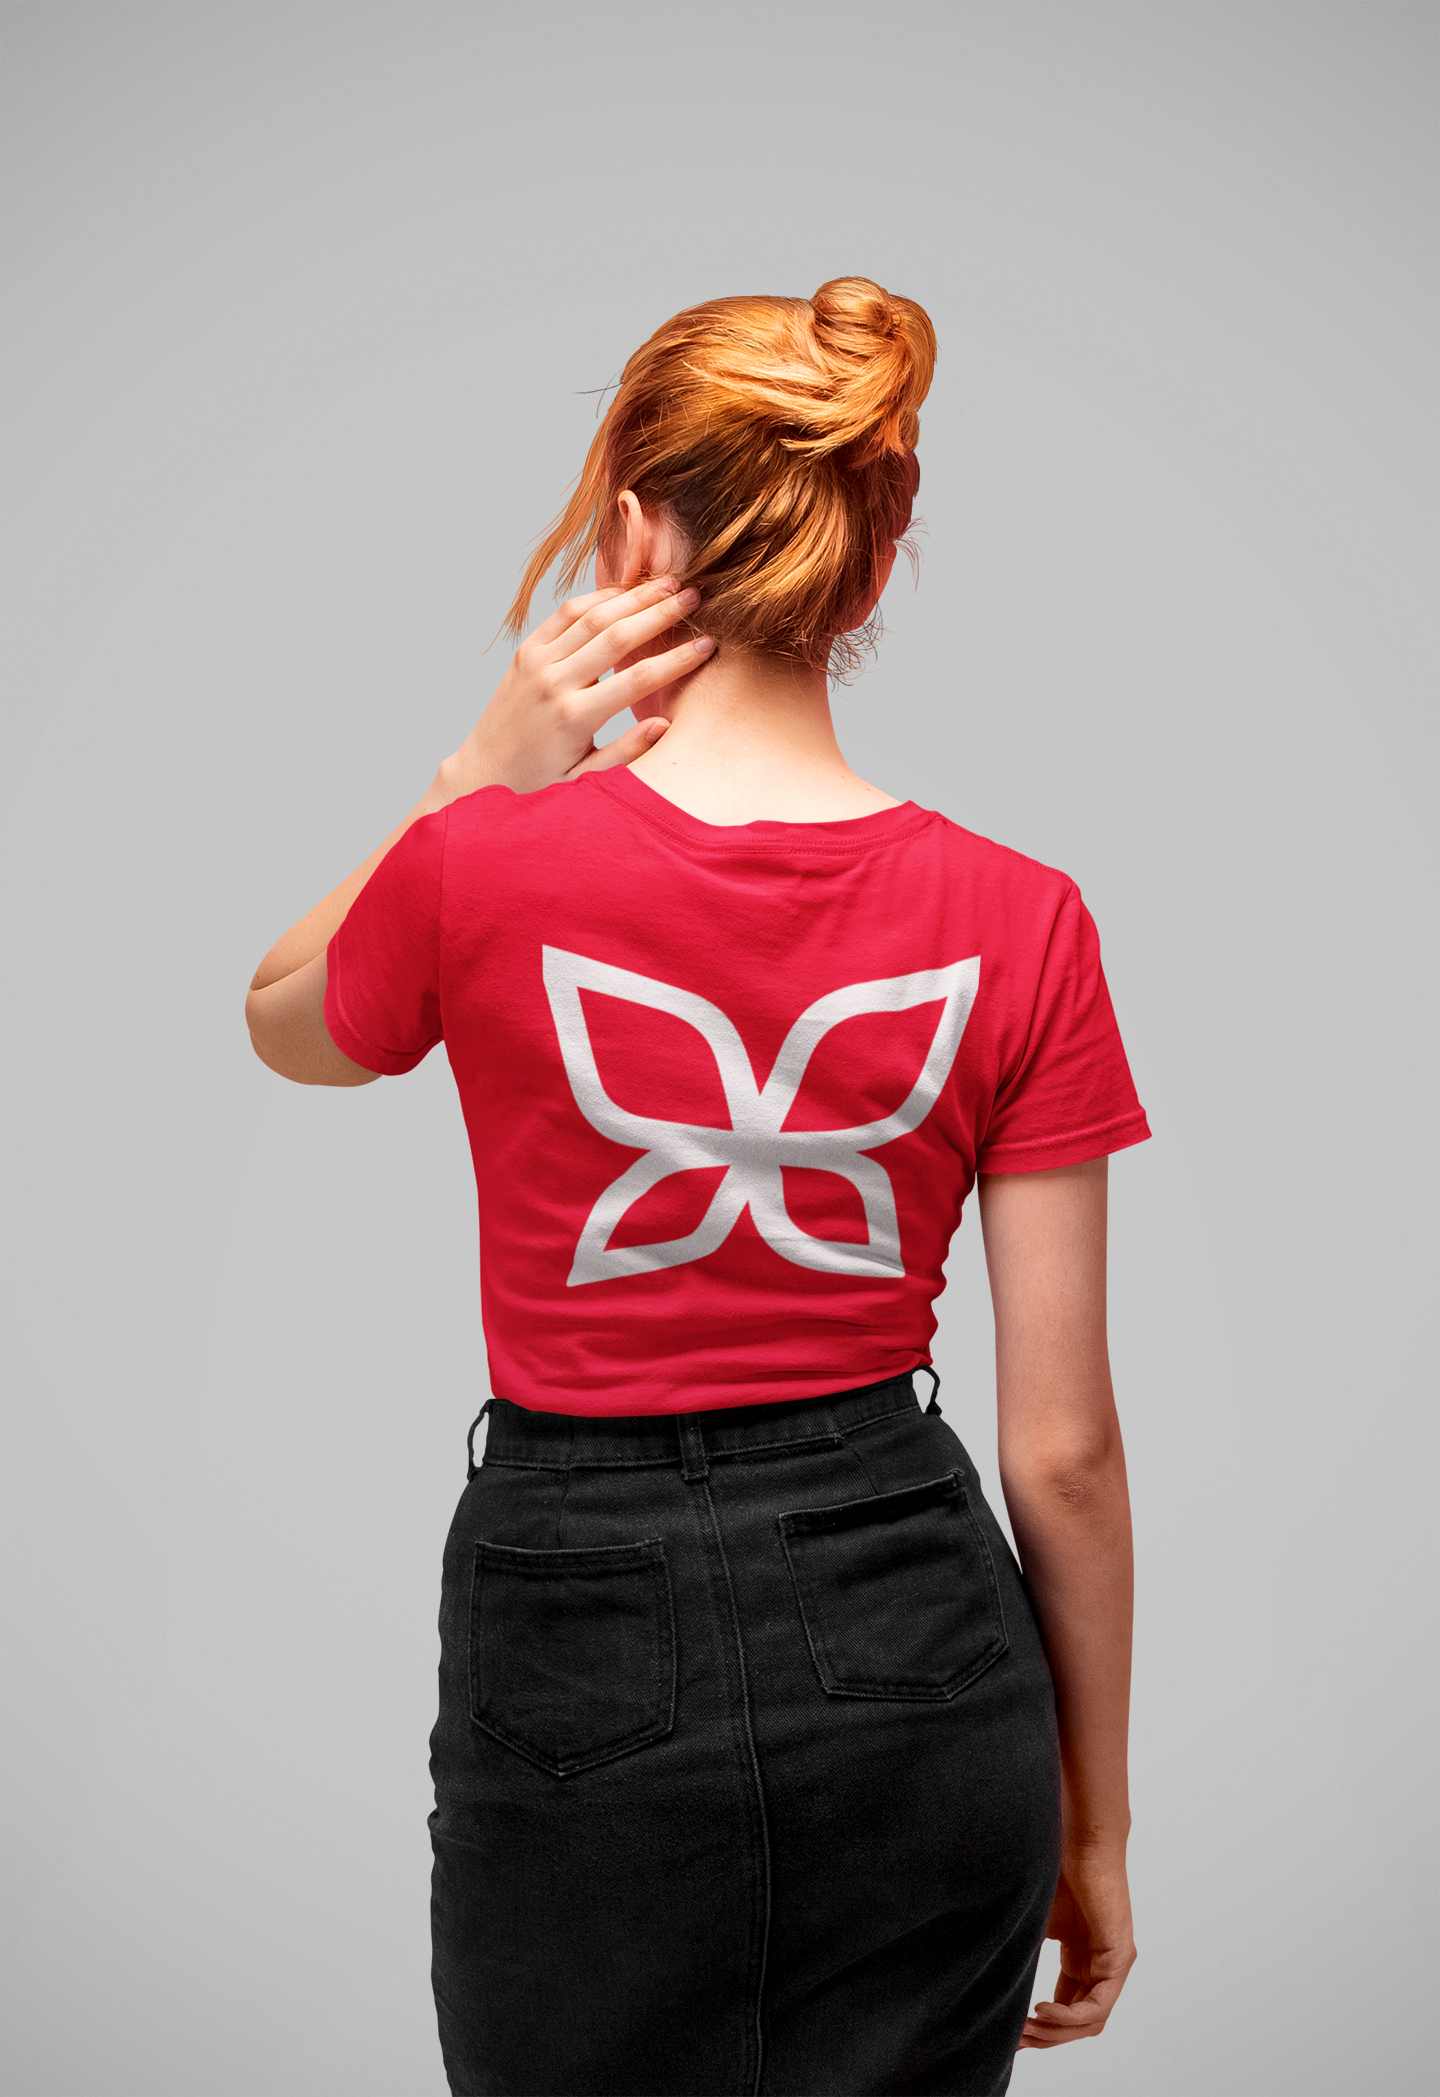 tee-mockup-featuring-a-red-haired-woman-s-back-in-a-studio-20879 copy